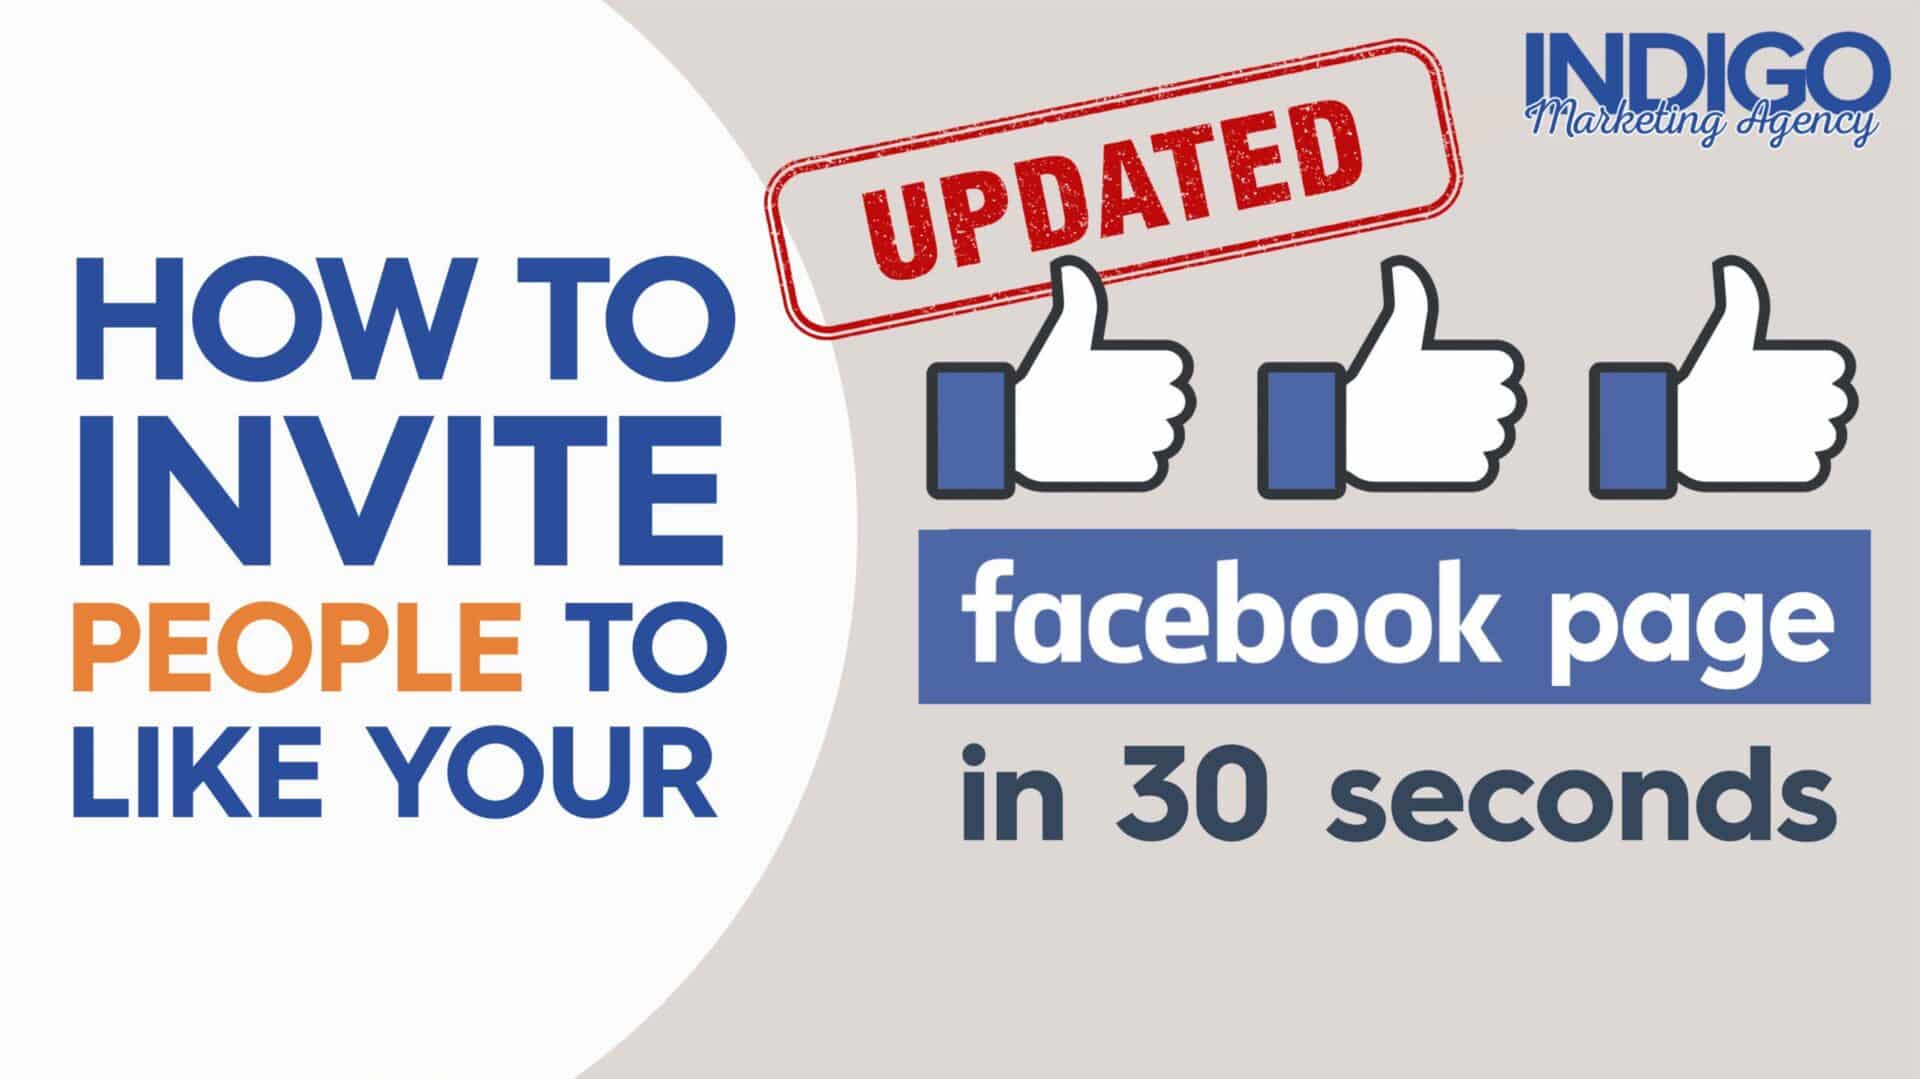 How to invite people to like your Facebook